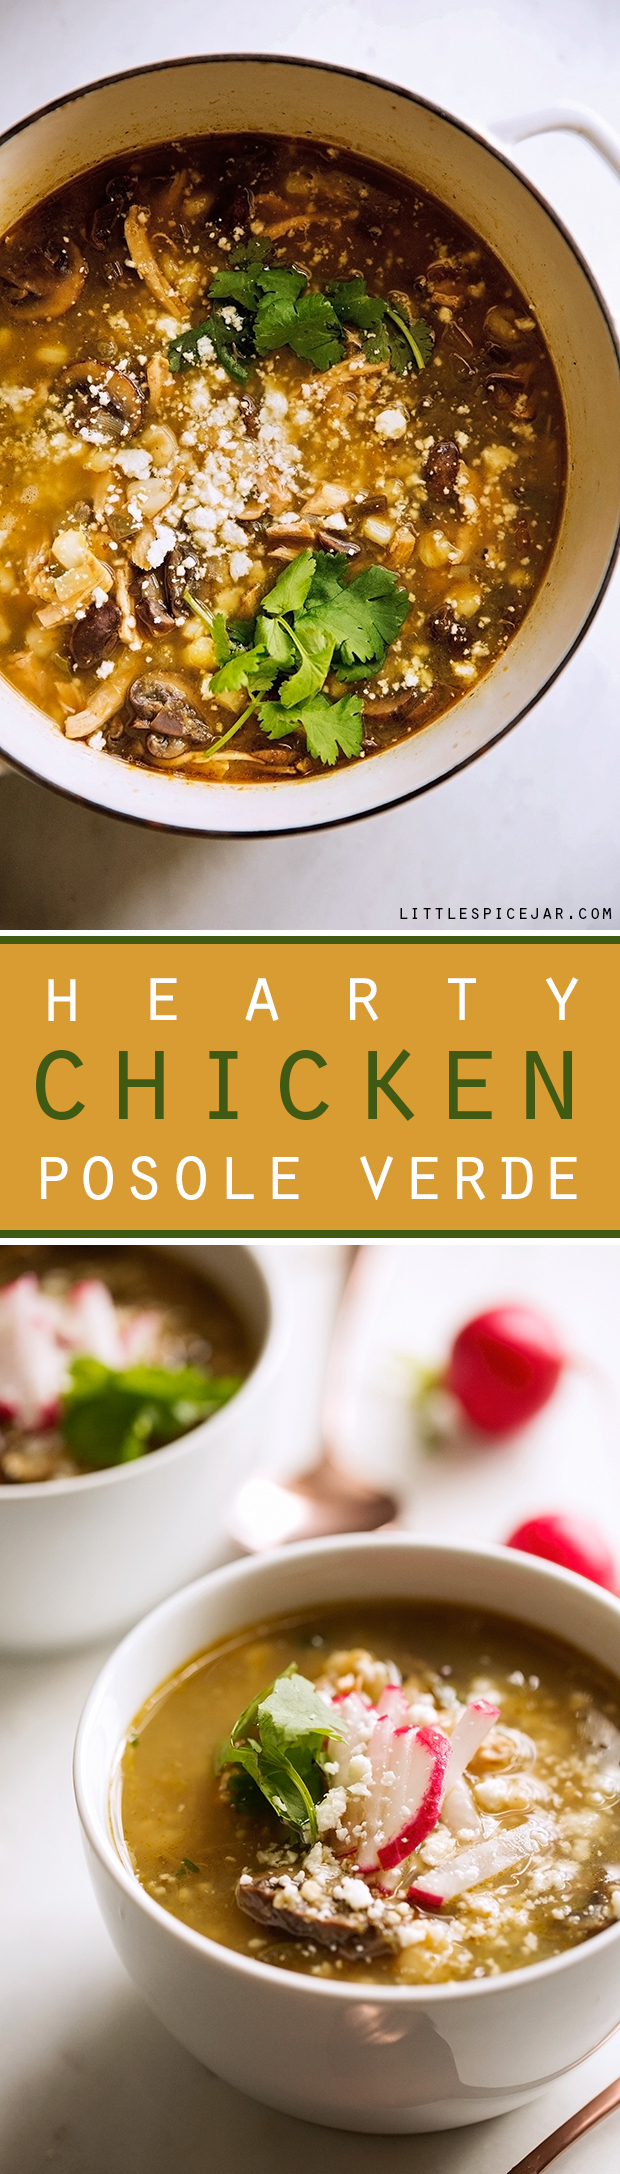 Hearty Chicken Posole Verde - loaded with shredded chicken and sliced mushrooms, this stew is super filling and so comforting! #chickenstew #chickenposole #posoleverde | Littlespicejar.com@littlespicejar